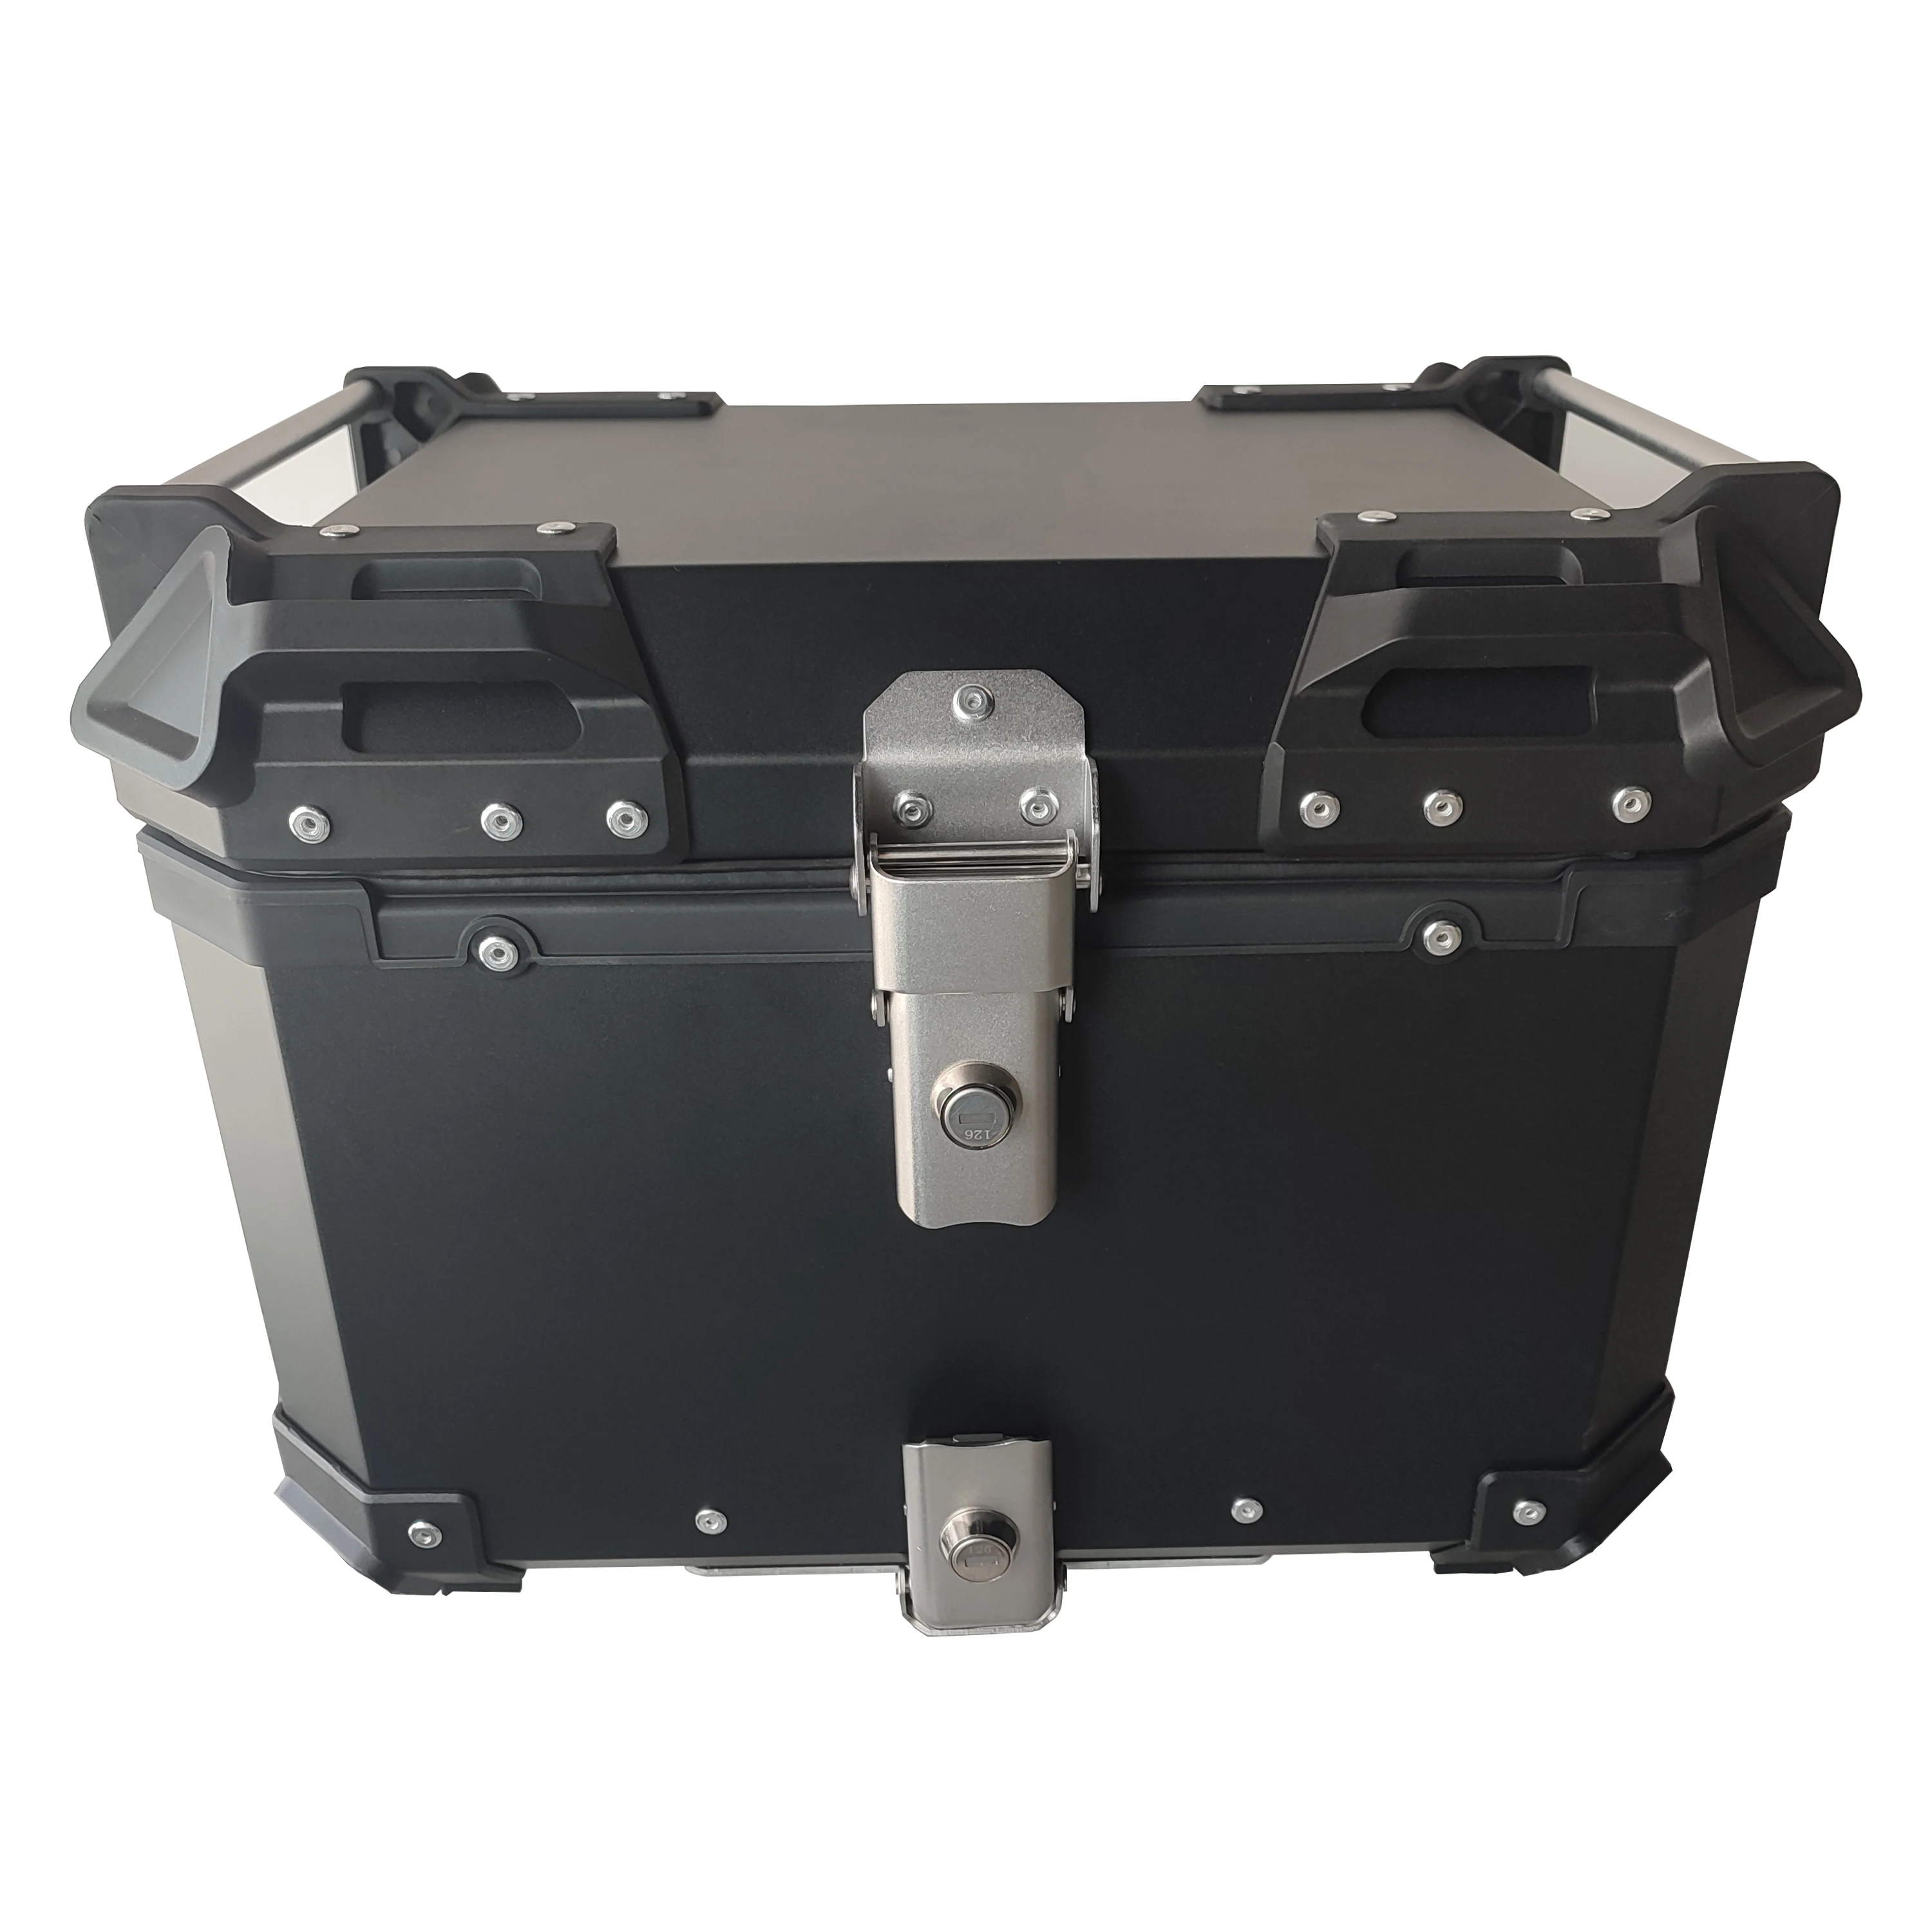 

OHHO New Cheaper Waterproof Aluminium Top Case Tail Box Delivery Trunk with quick adapter